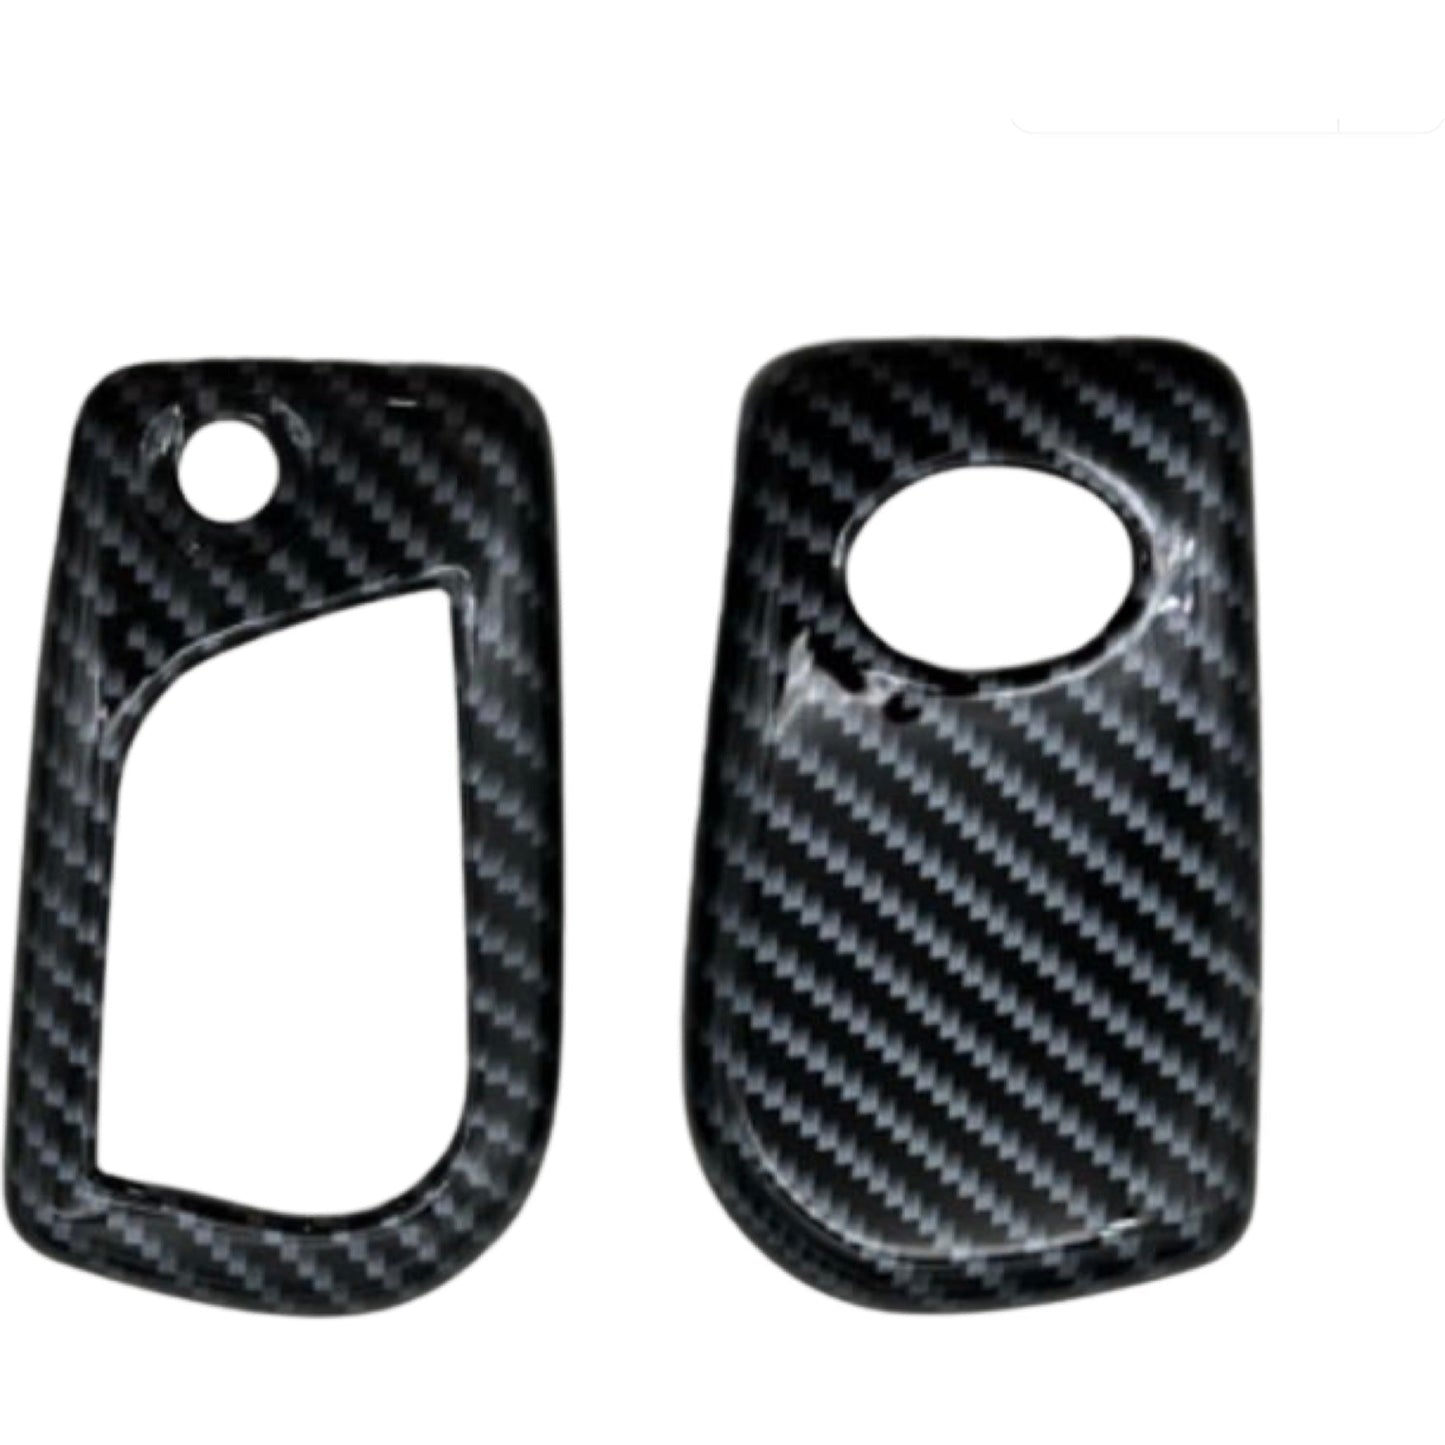 Toyota Key Cover carbon fibre pattern | Corolla, Camry, Hilux, RAV4 Key fob cover | Toyota Accessories - Keysleeves